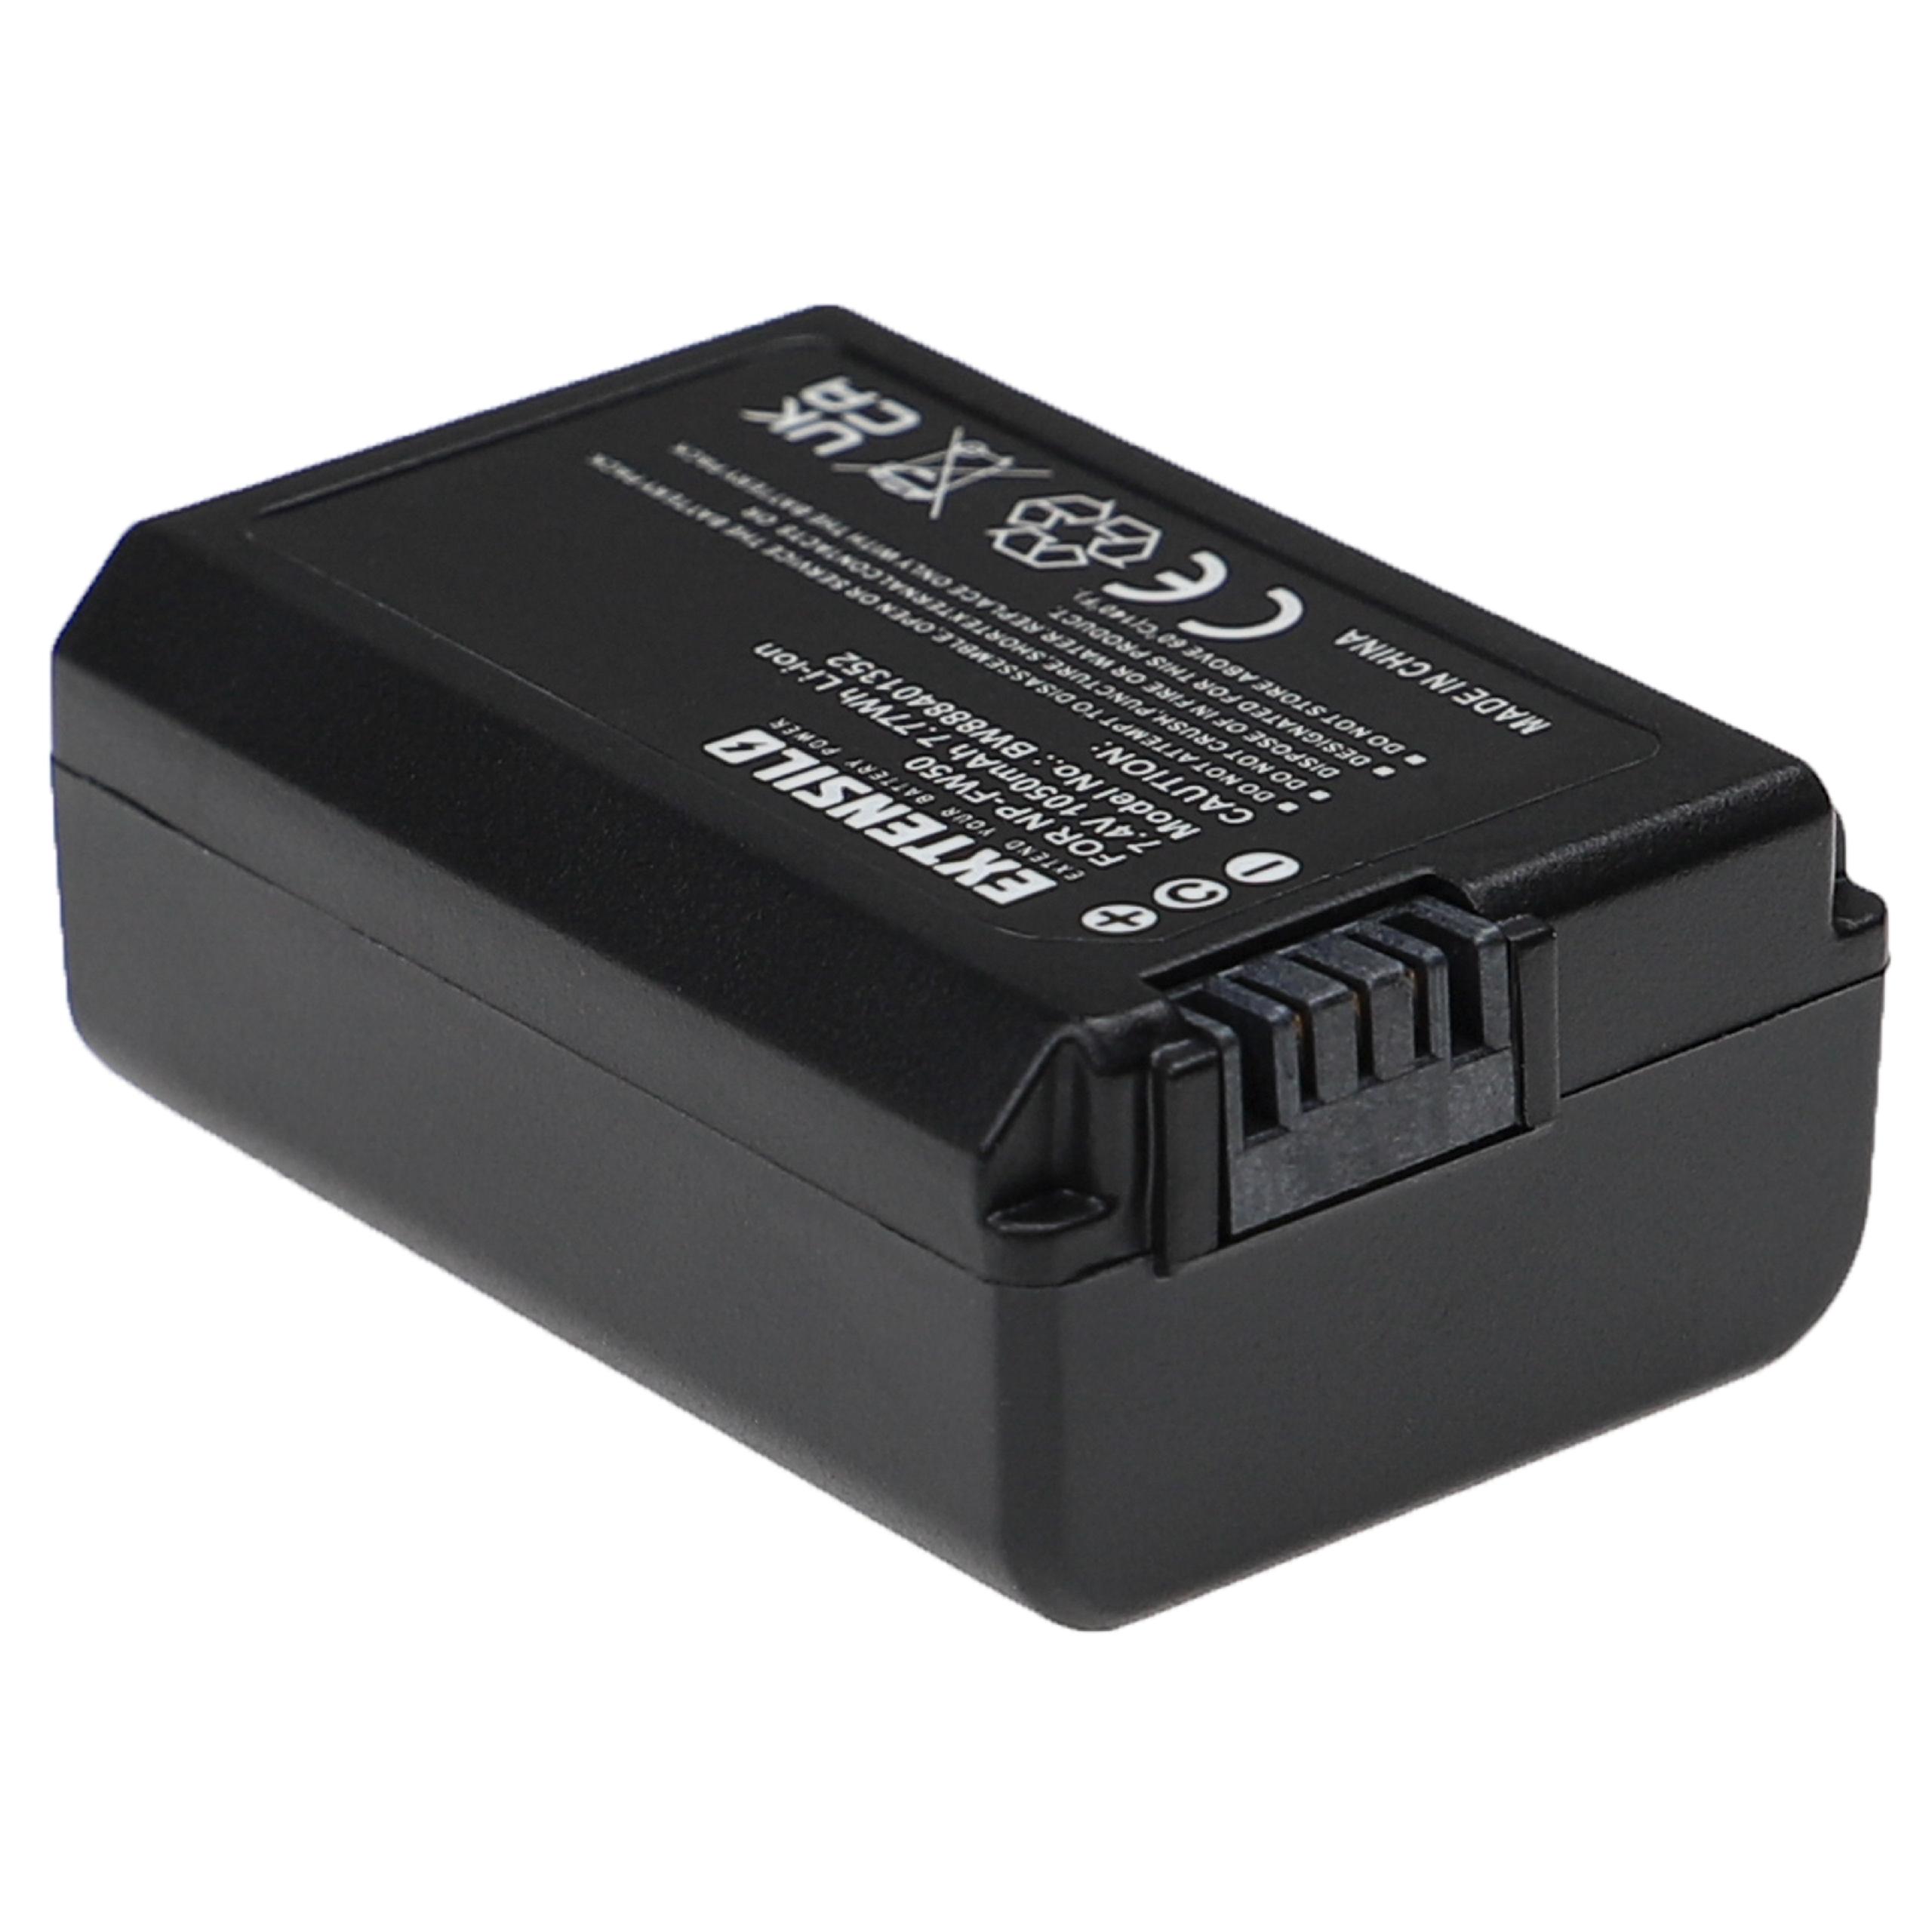 Battery Replacement for Sony NP-FW50 - 1050mAh, 7.4V, Li-Ion